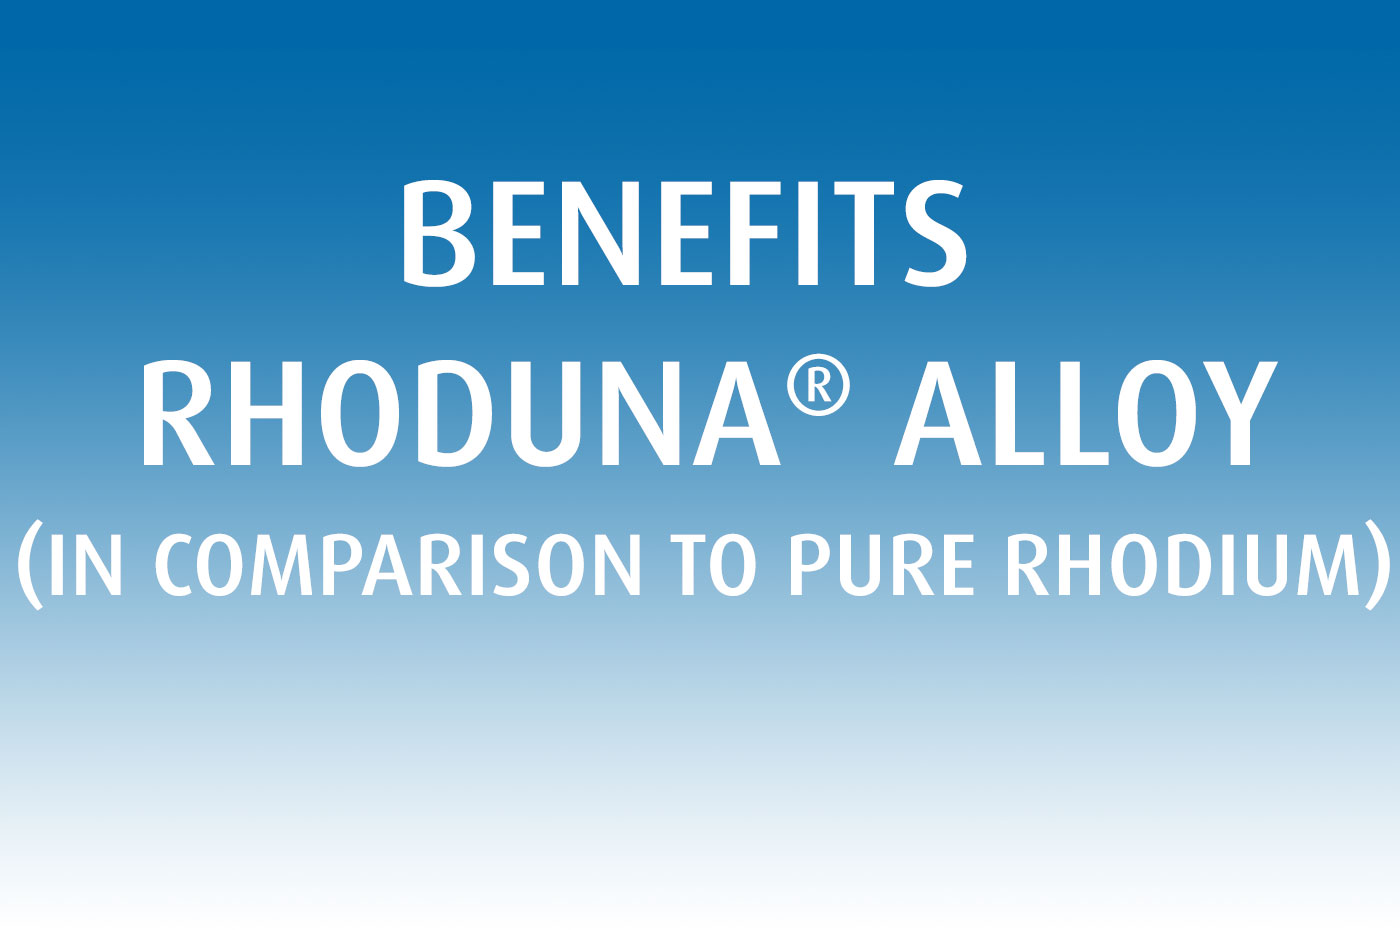 RHODUNA Alloy – abrasion resistant like no other bright white rhodium coating - Umicore Metal Deposition Solutions - Benefits